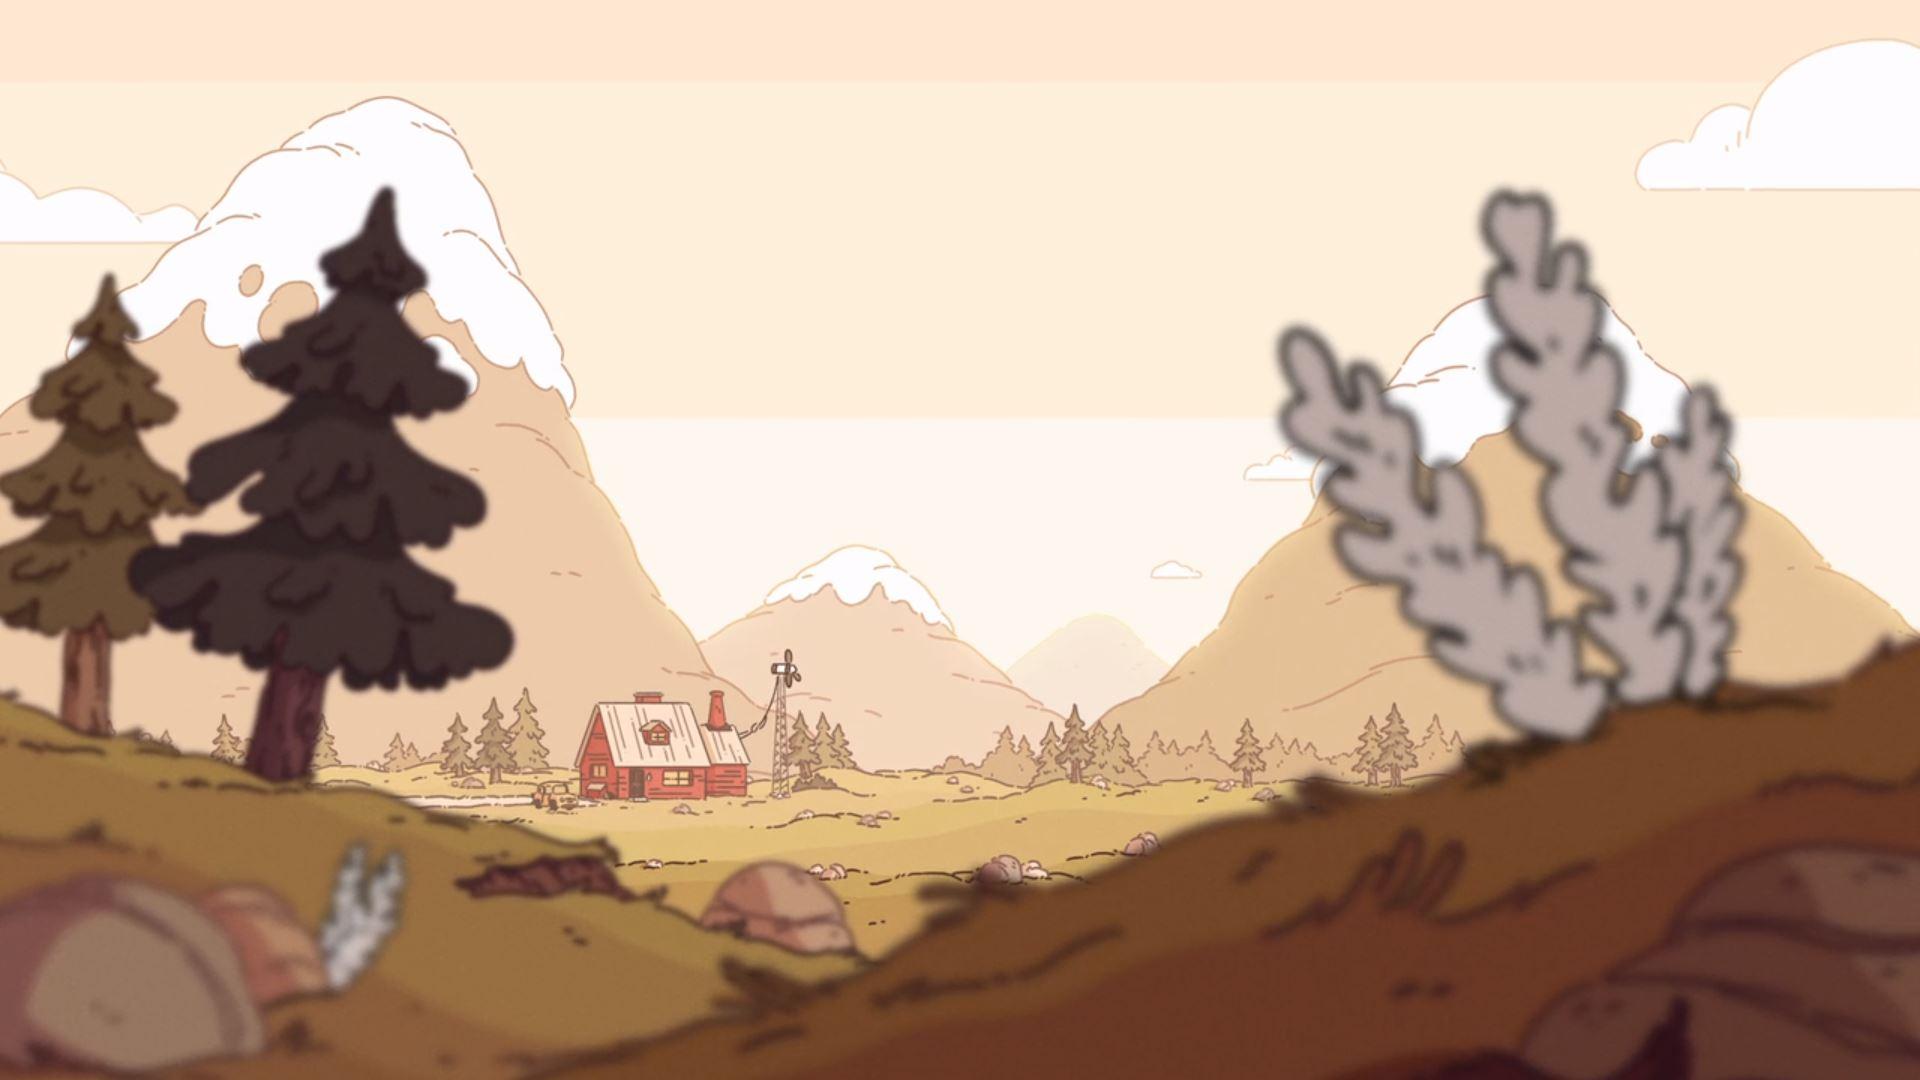 I Love This Show So Much Needed It As My Wallpaper Hildatheseries